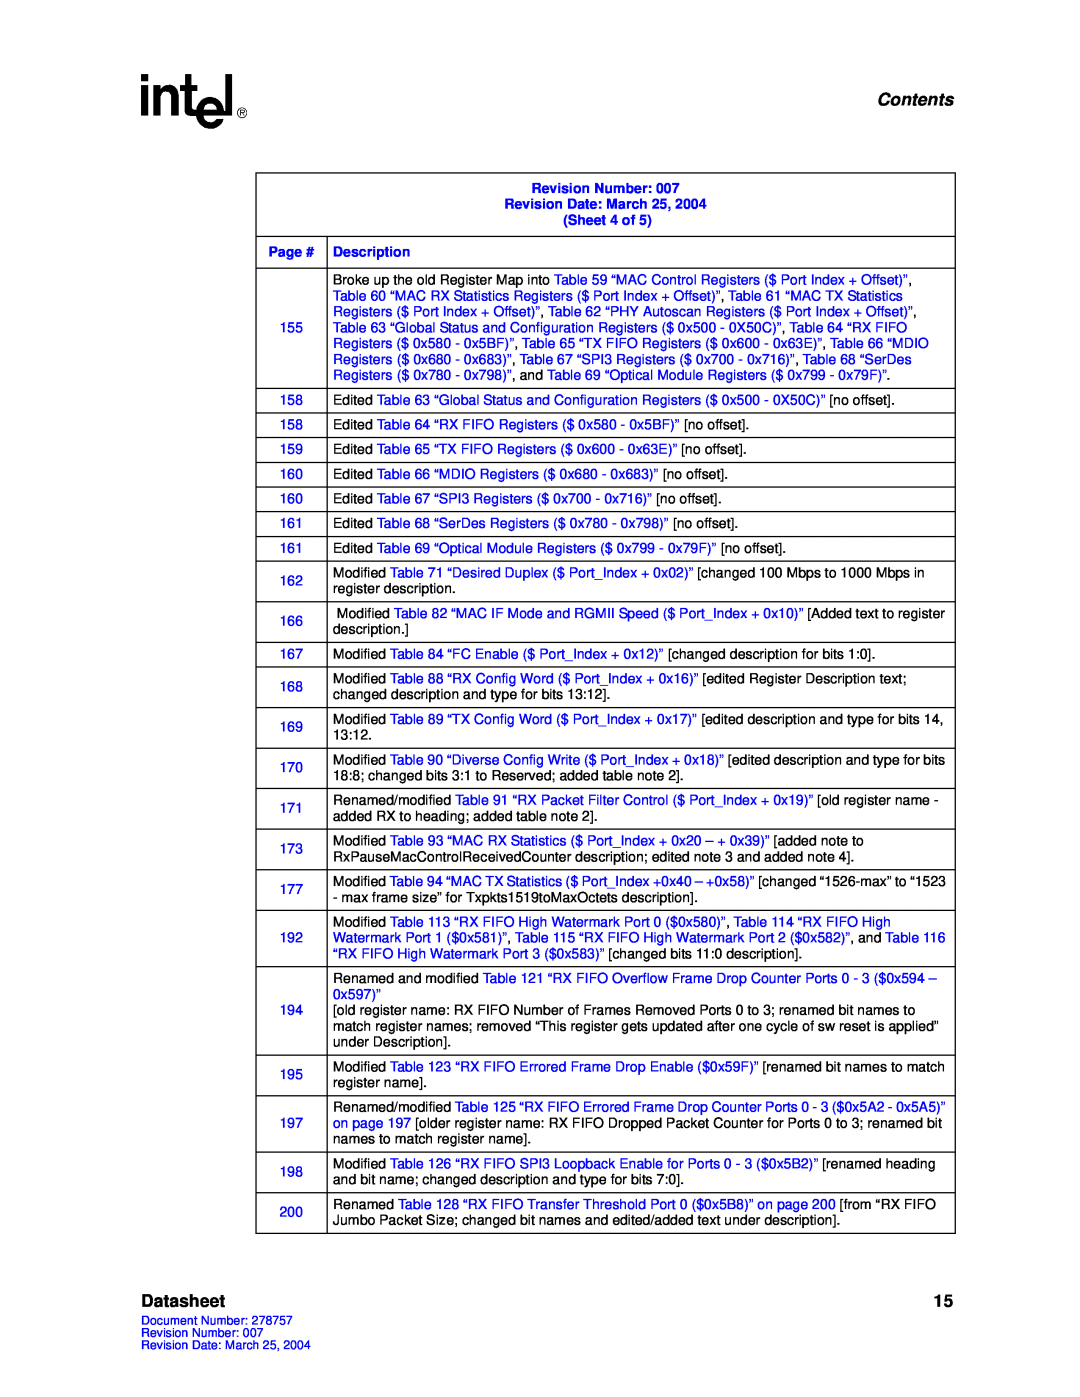 Intel IXF1104 manual Contents, Datasheet, Revision Number: Revision Date: March 25, Sheet 4 of Page # Description 